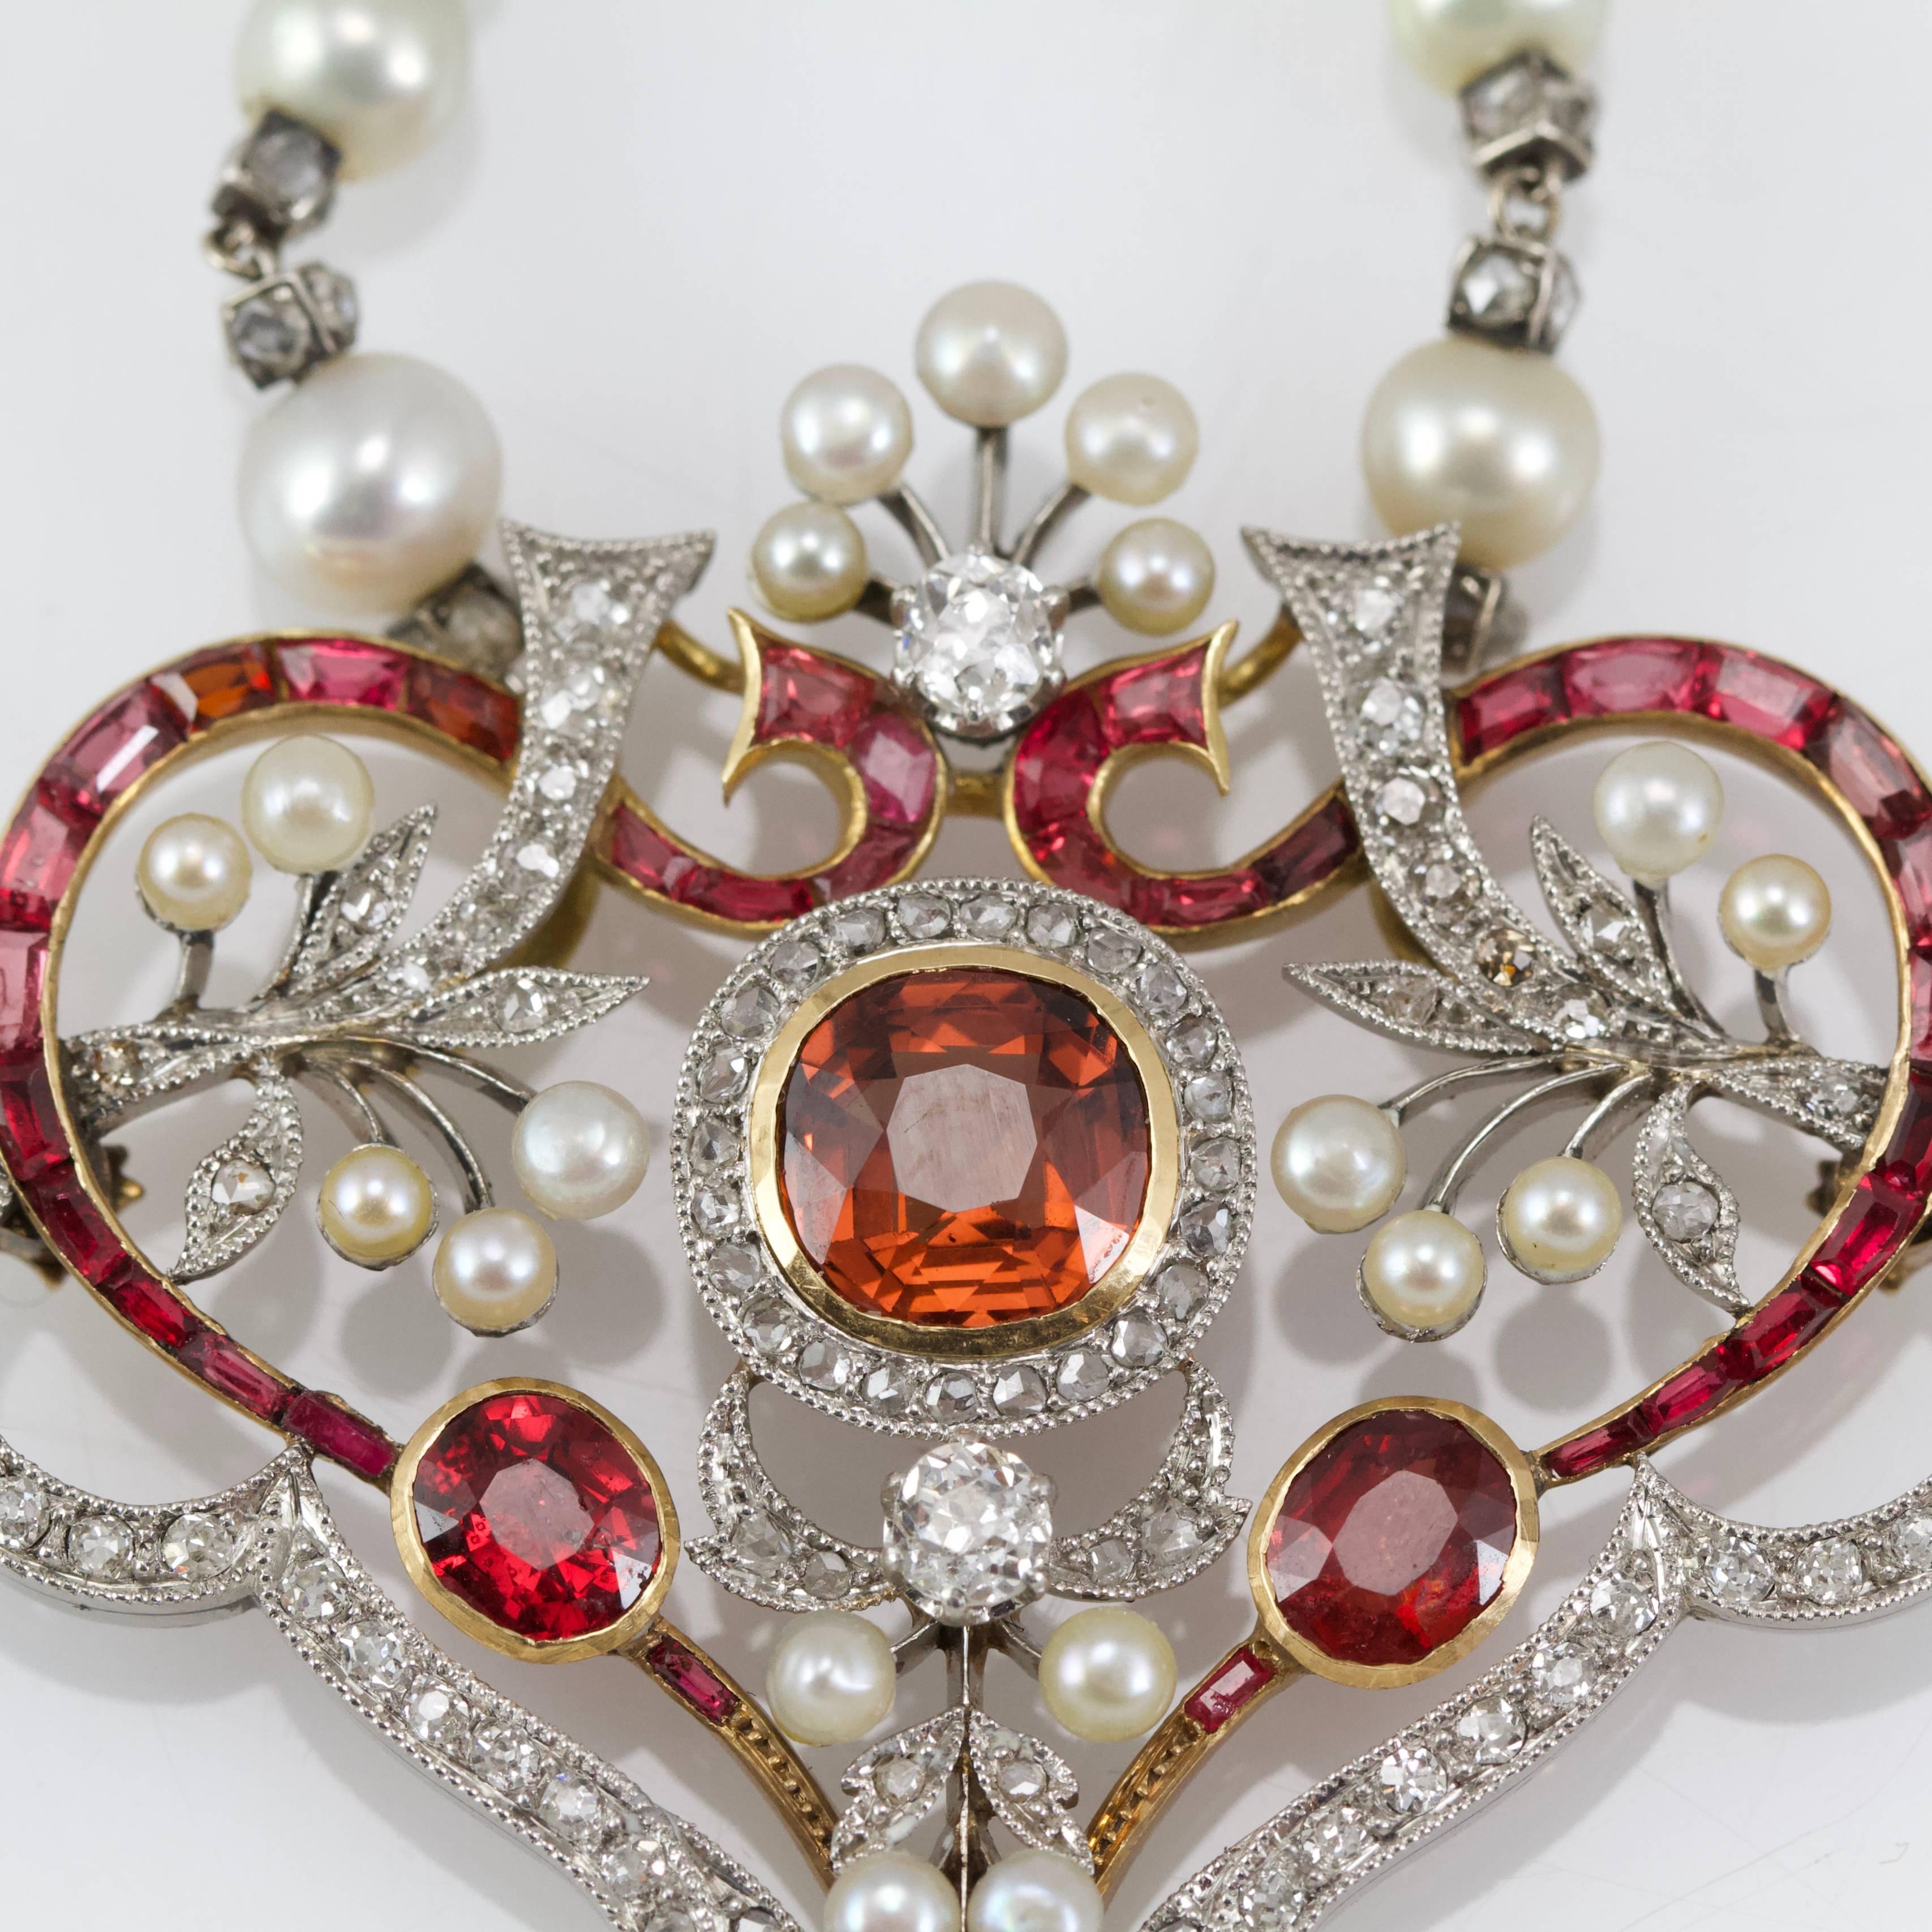 Belle Epoque Diamond, Spinelle, Garnet and Pearls Necklace from Paris 1